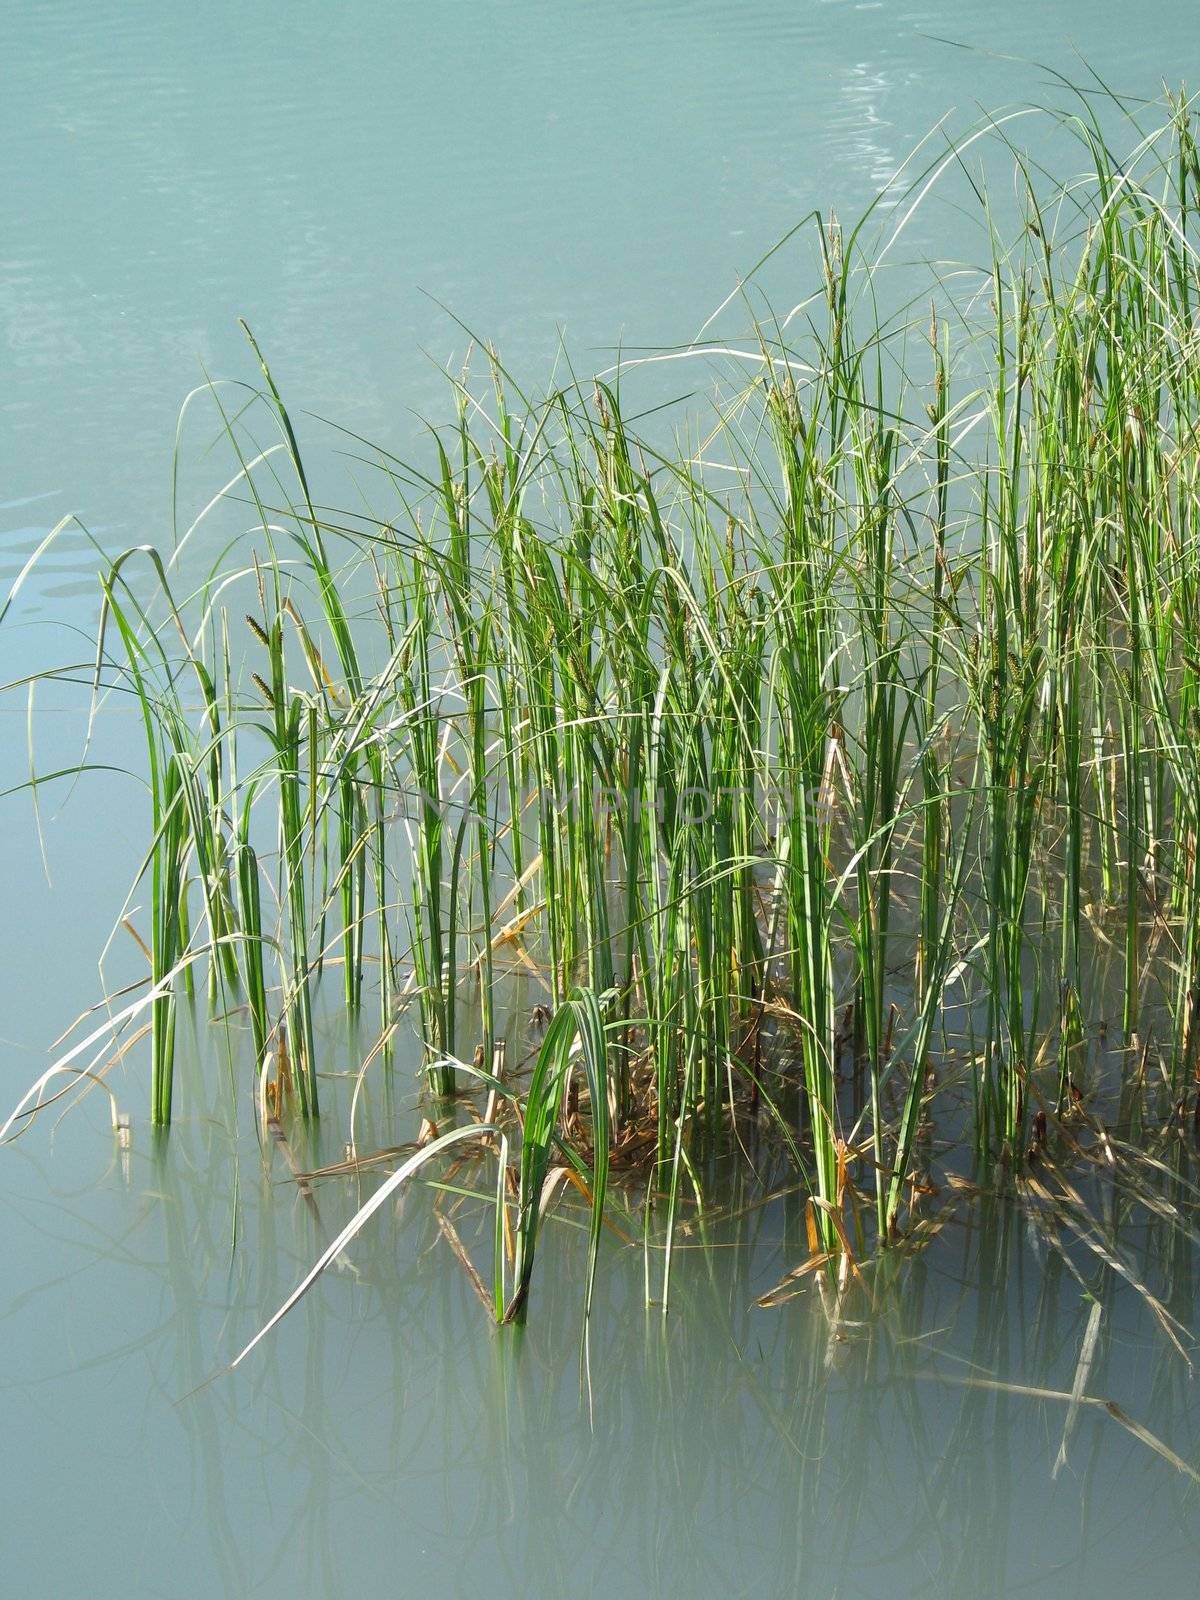 green reeds in a turquoise lake by mmm